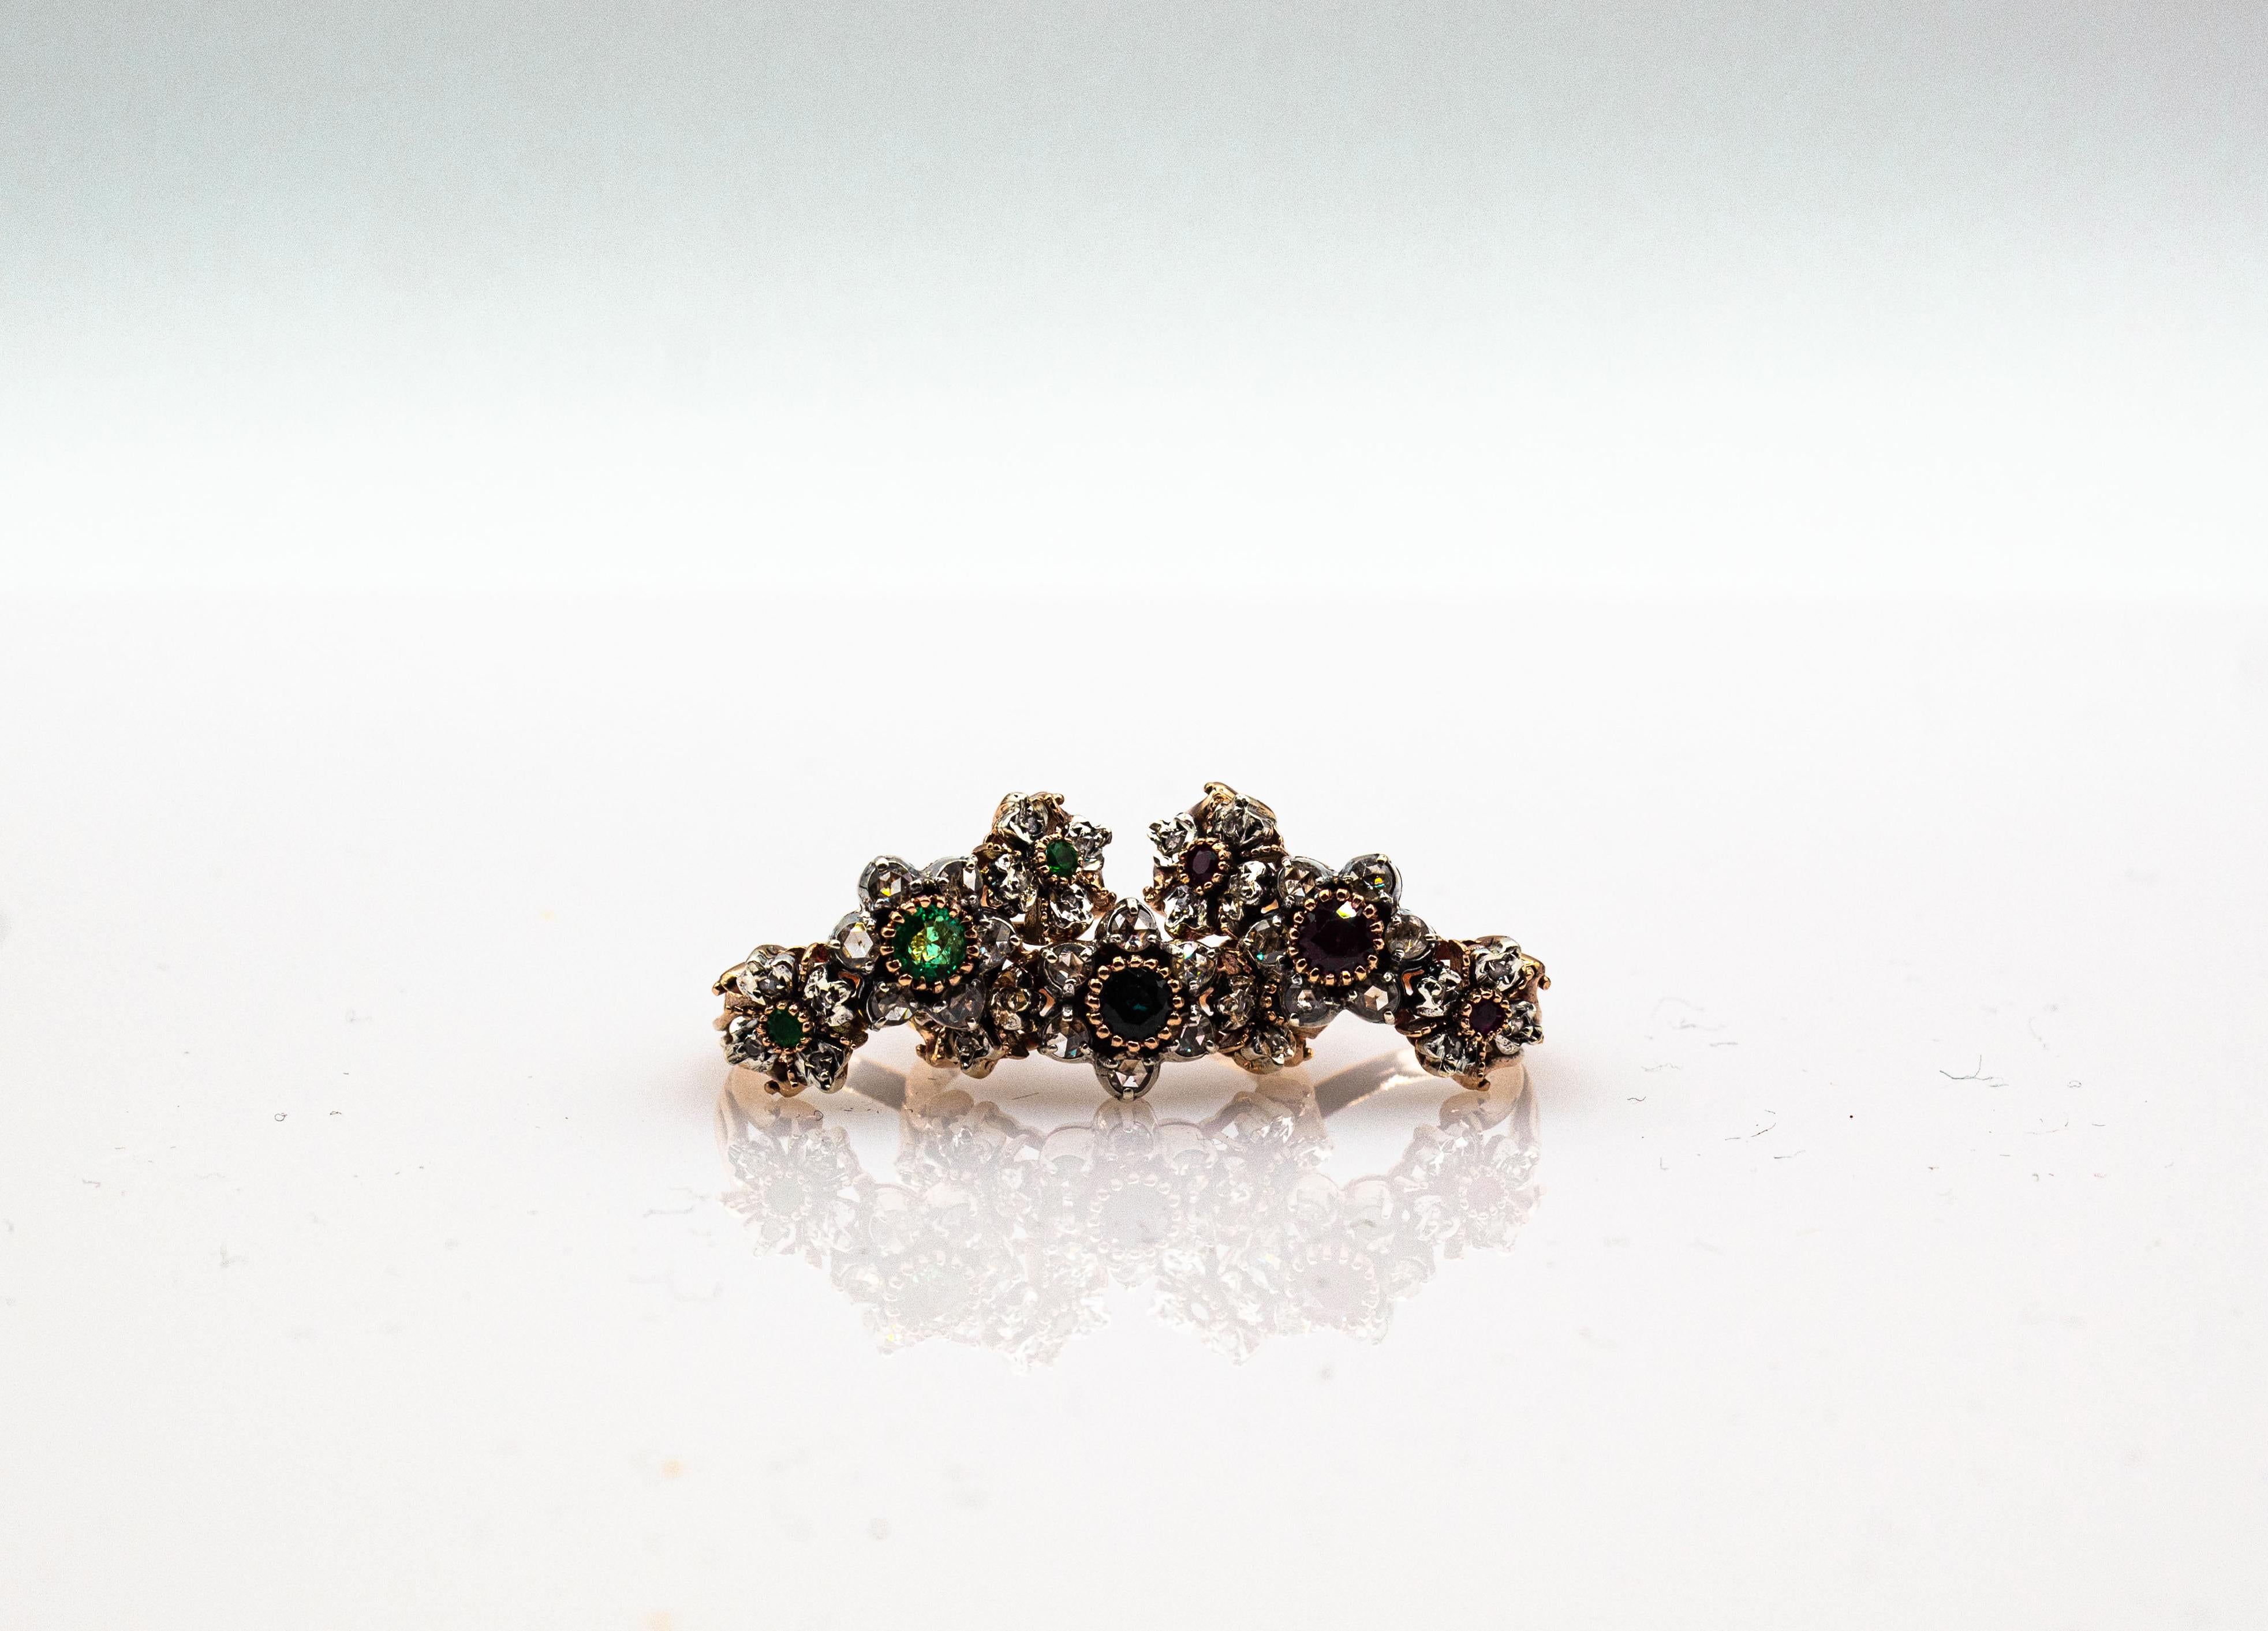 This Ring is made of 9K Yellow Gold and Sterling Silver.
This Ring has 0.22 Carats of White Rose Cut Diamonds.
This Ring has 0.60 Carats of Modern Round Cut Emeralds.

This Ring is available also in 14 or 18K Yellow or White Gold.
This Ring is